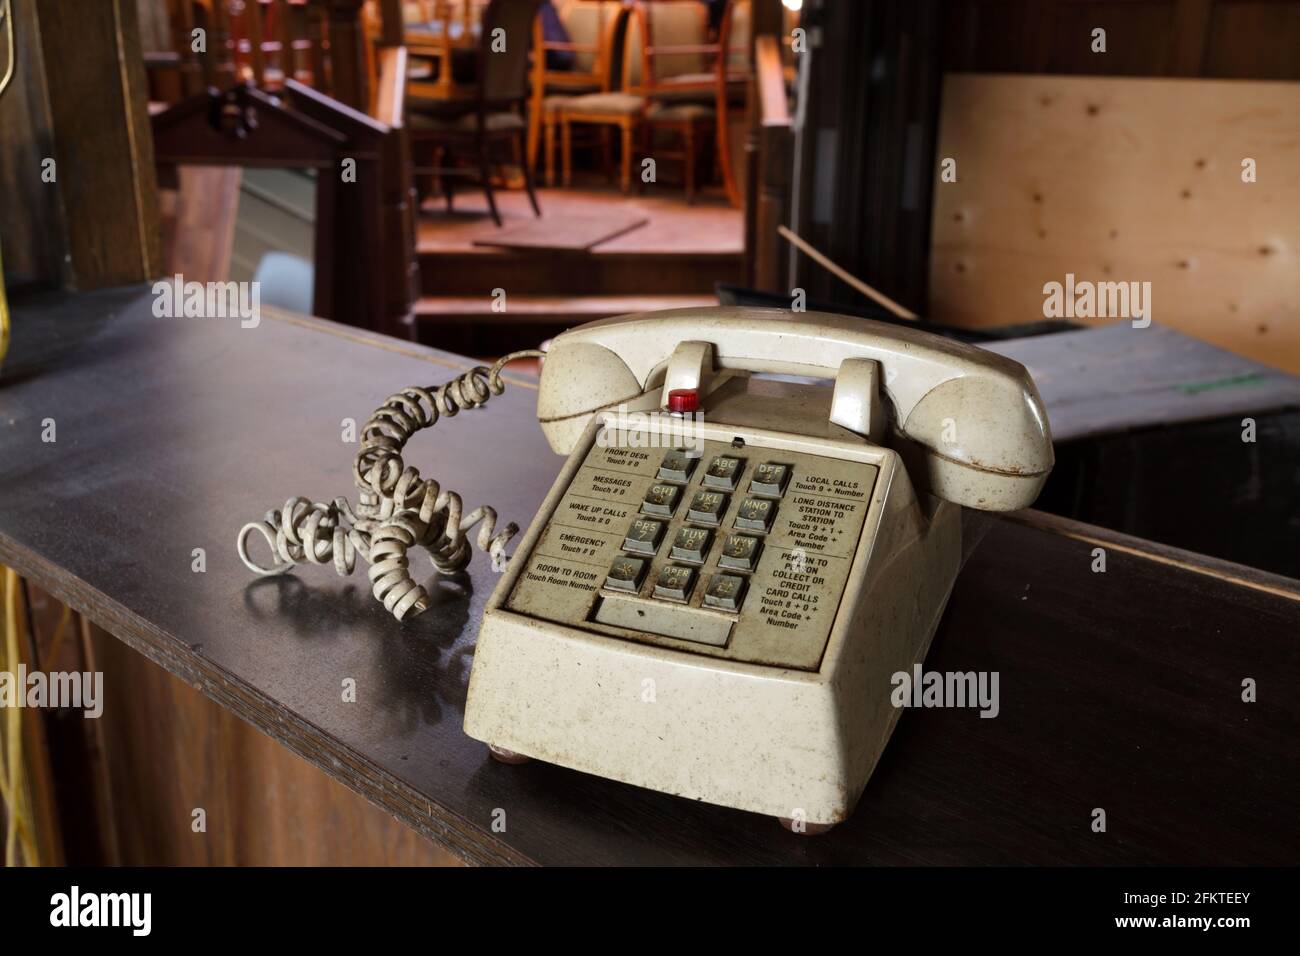 A grungy courtesy phone inside an abandoned hotel lobby. This building has been demolished and no longer exists. Stock Photo